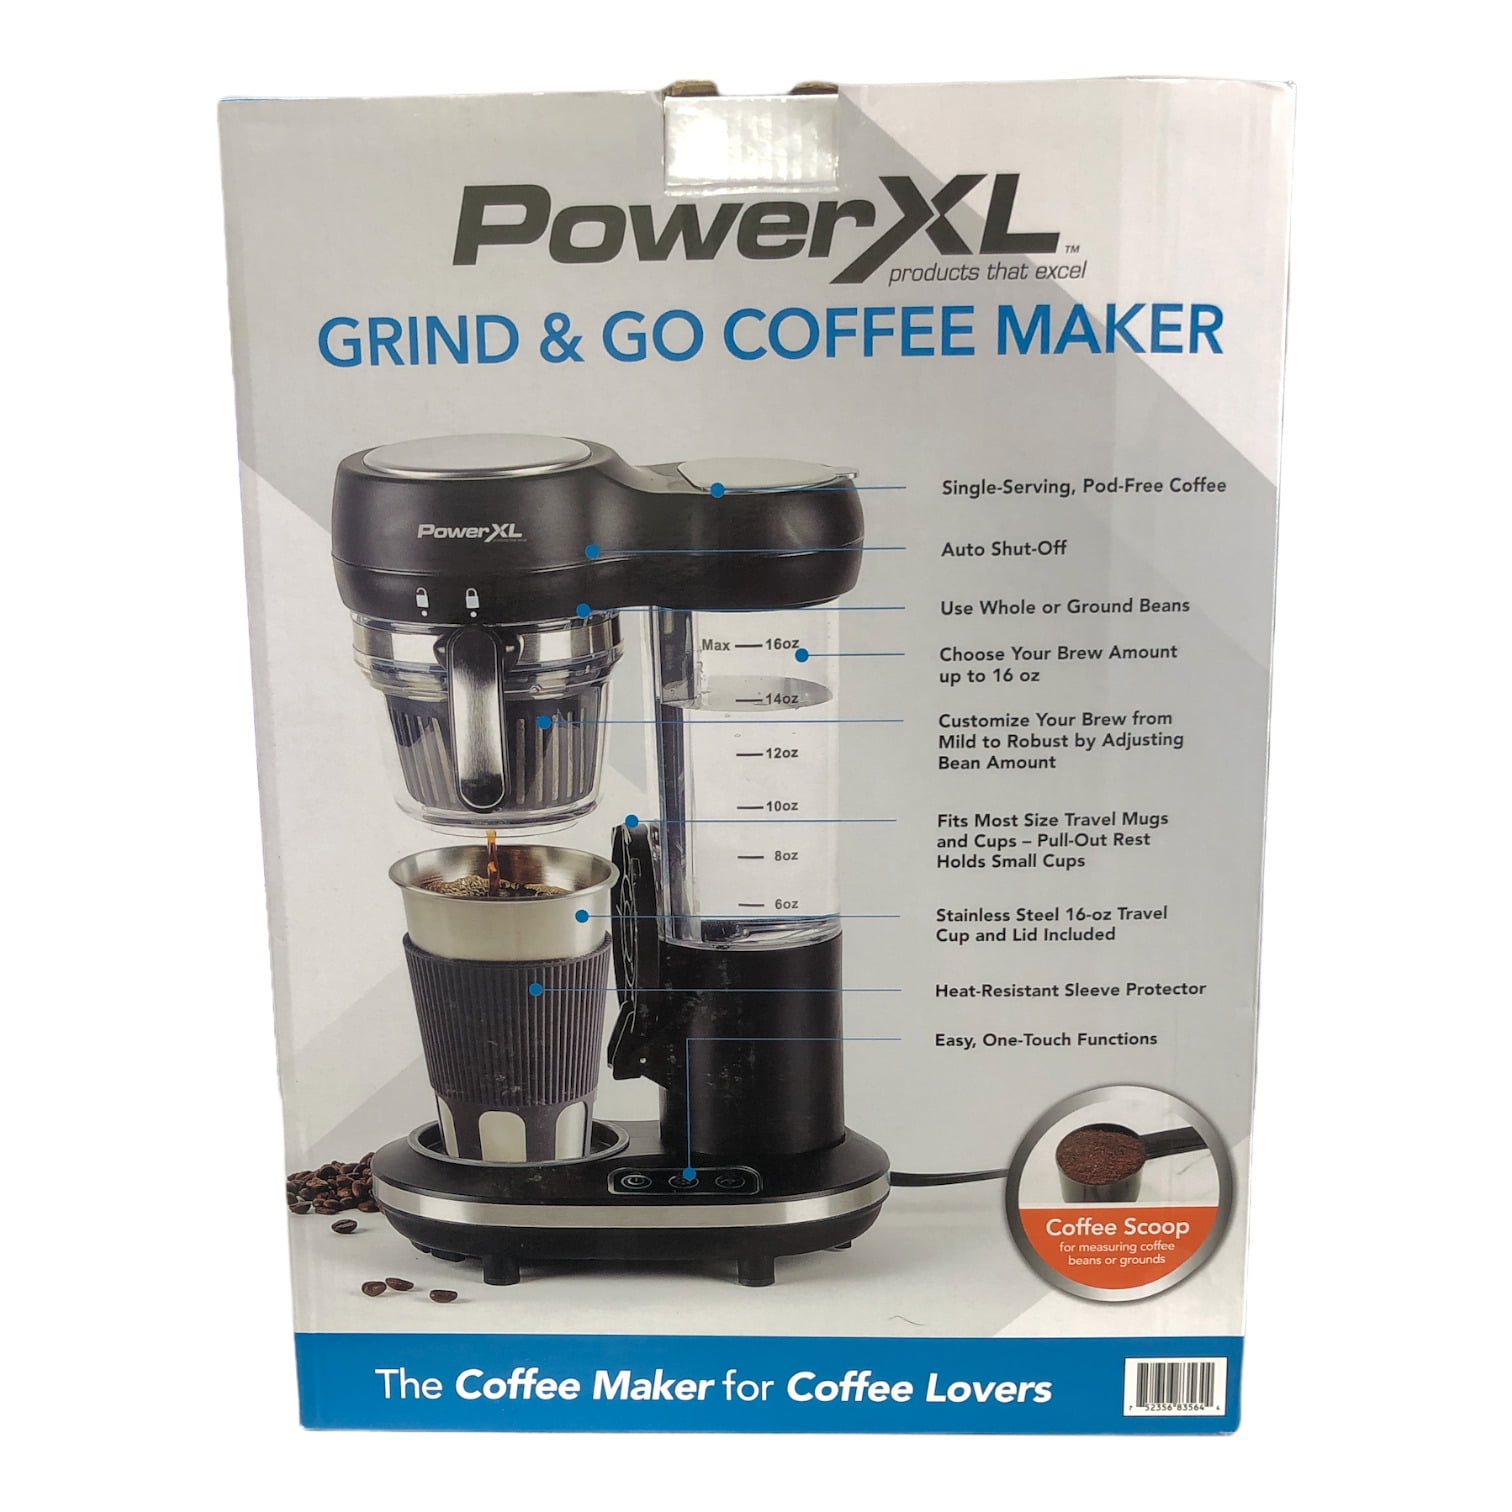 PowerXL Grind & Go Coffee Maker, How To Start Make Coffee